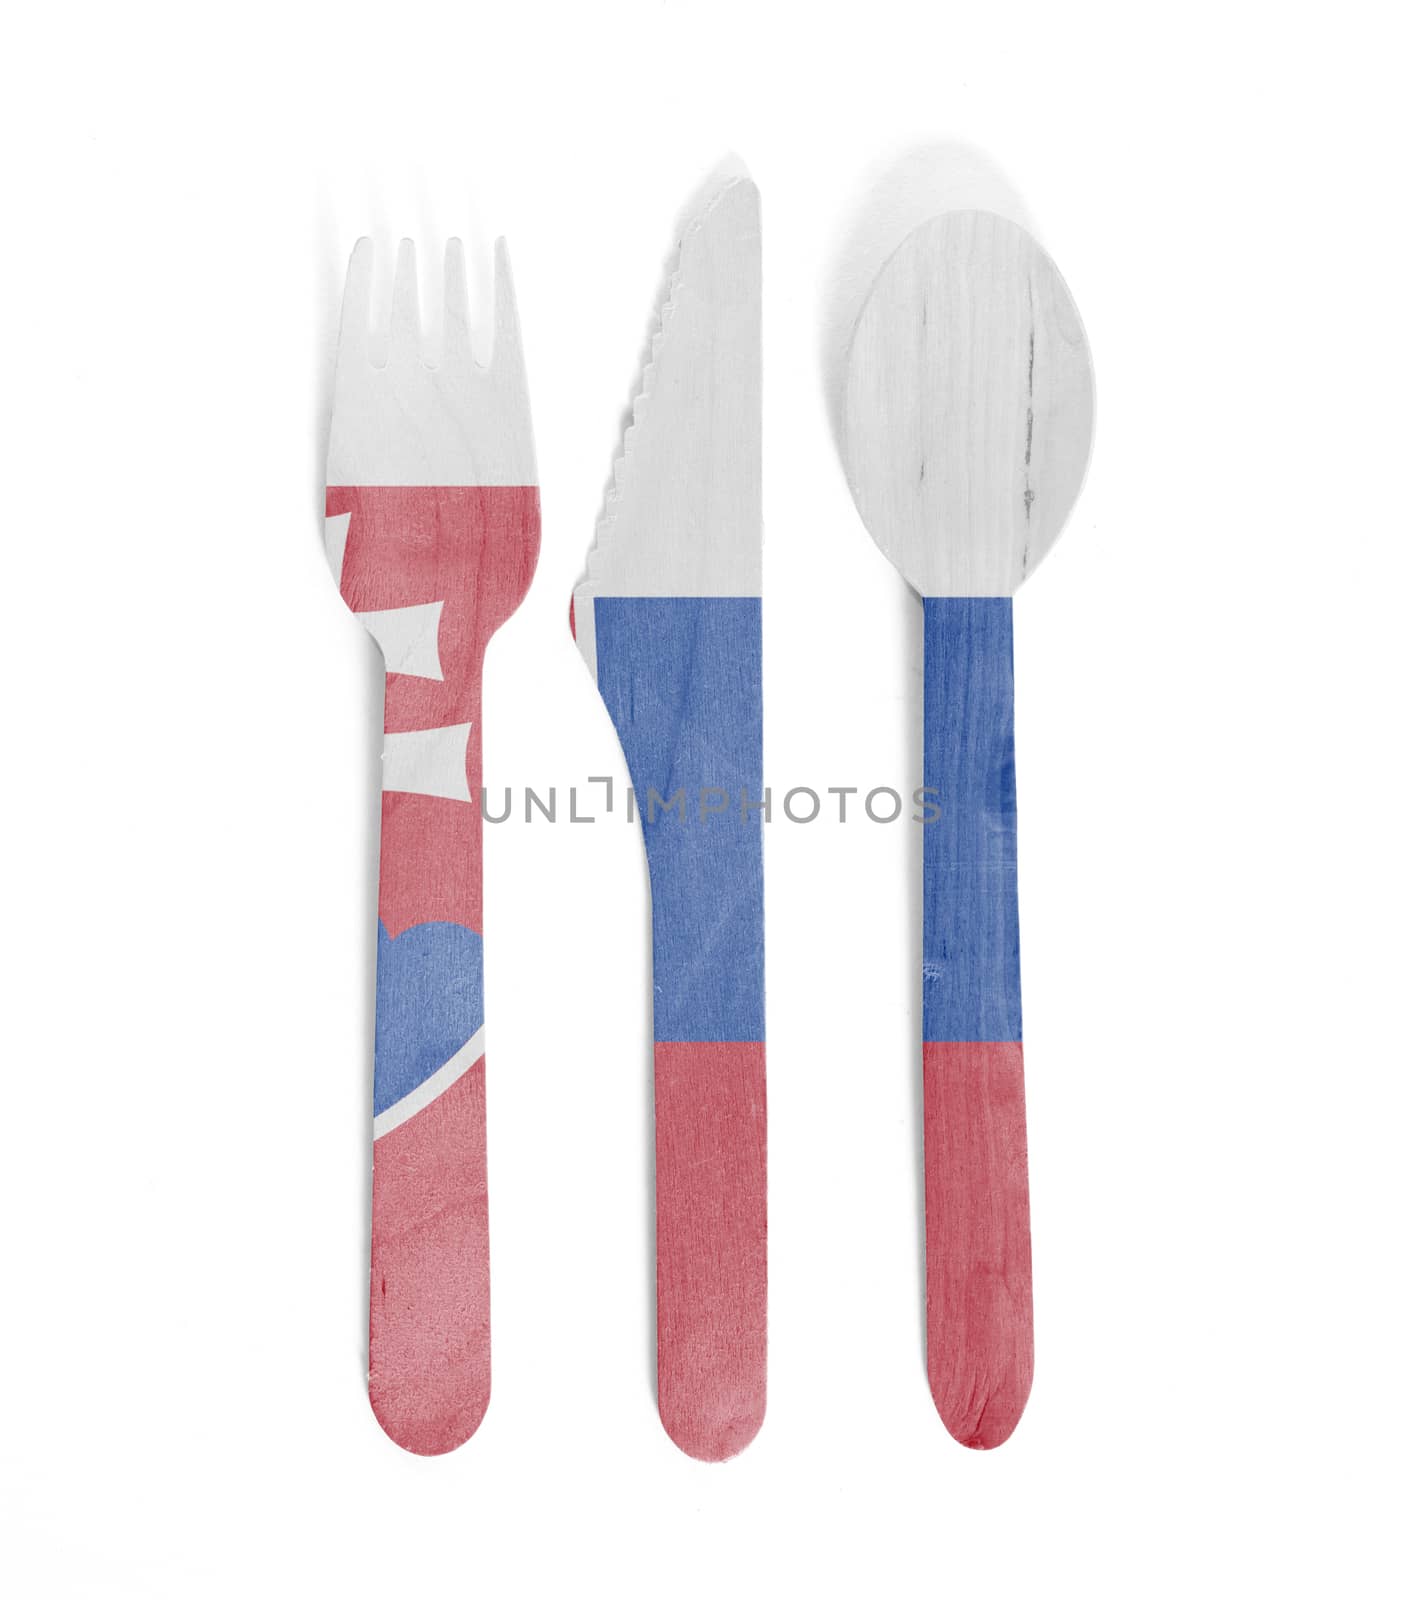 Eco friendly wooden cutlery - Plastic free concept - Flag of Slo by michaklootwijk